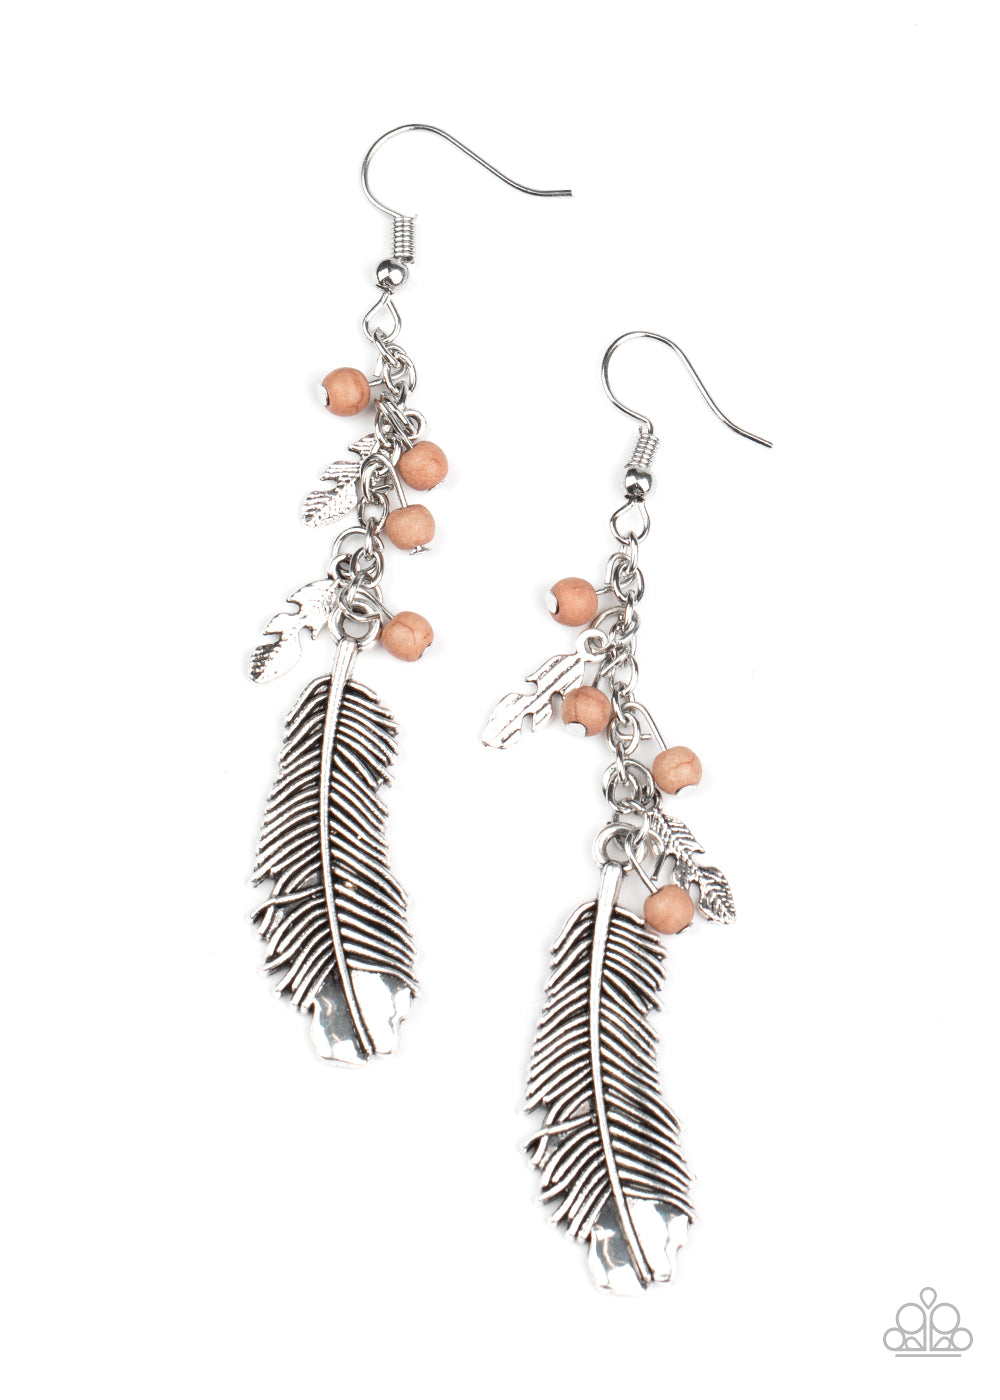 Dainty brown stone beads and shiny silver feather charms trickle along a dainty silver chain, giving way to a life-like silver feather frame for a free-spirited finish. Earring attaches to a standard fishhook fitting.